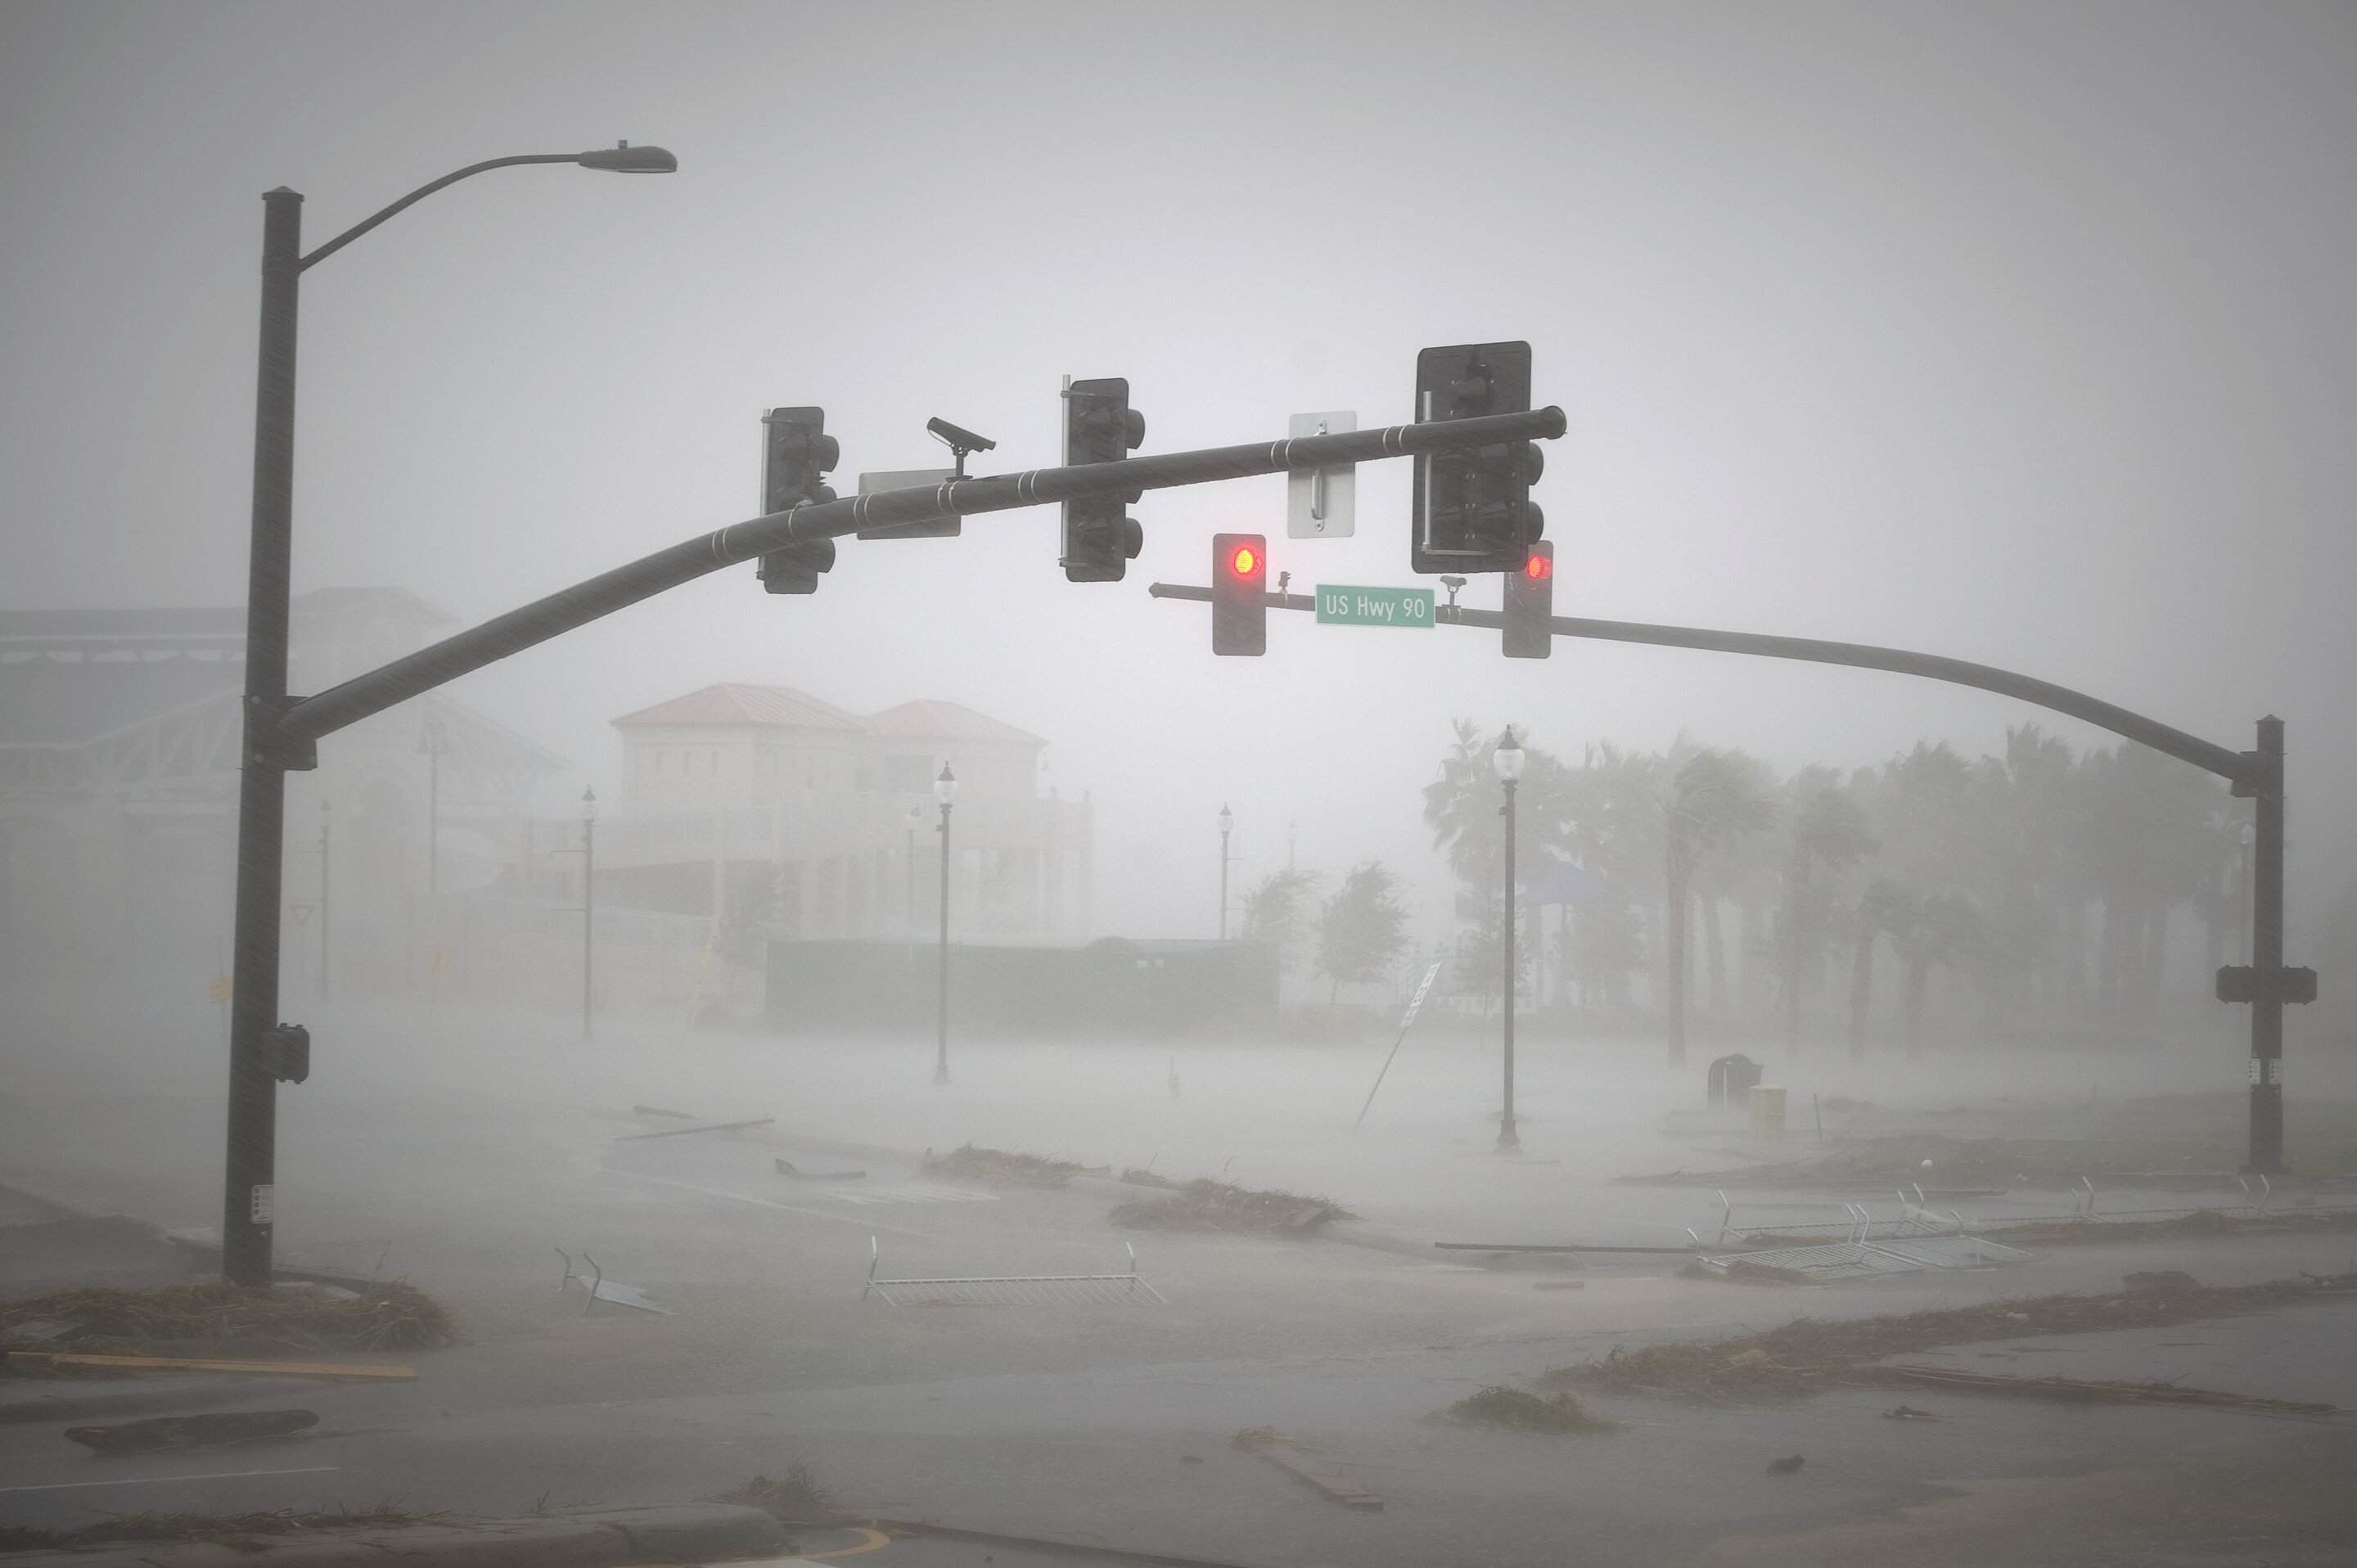 Burying short sections of power lines would drastically reduce hurricanes' future impact on coastal residents